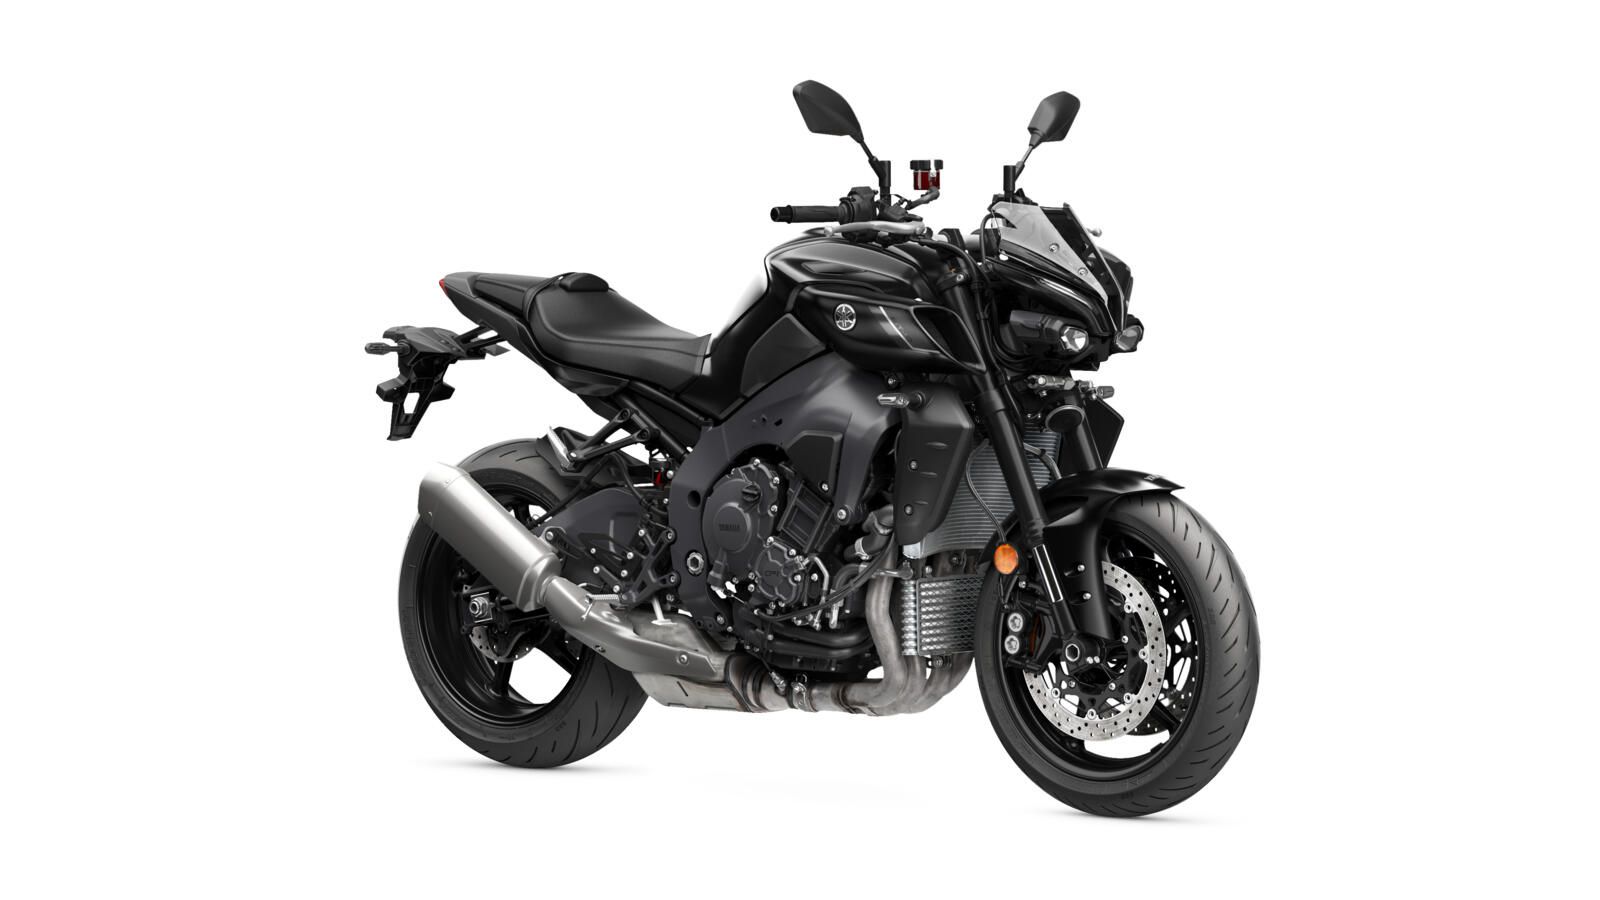 The 2022 Yamaha MT-10 in Tech Black colorway.